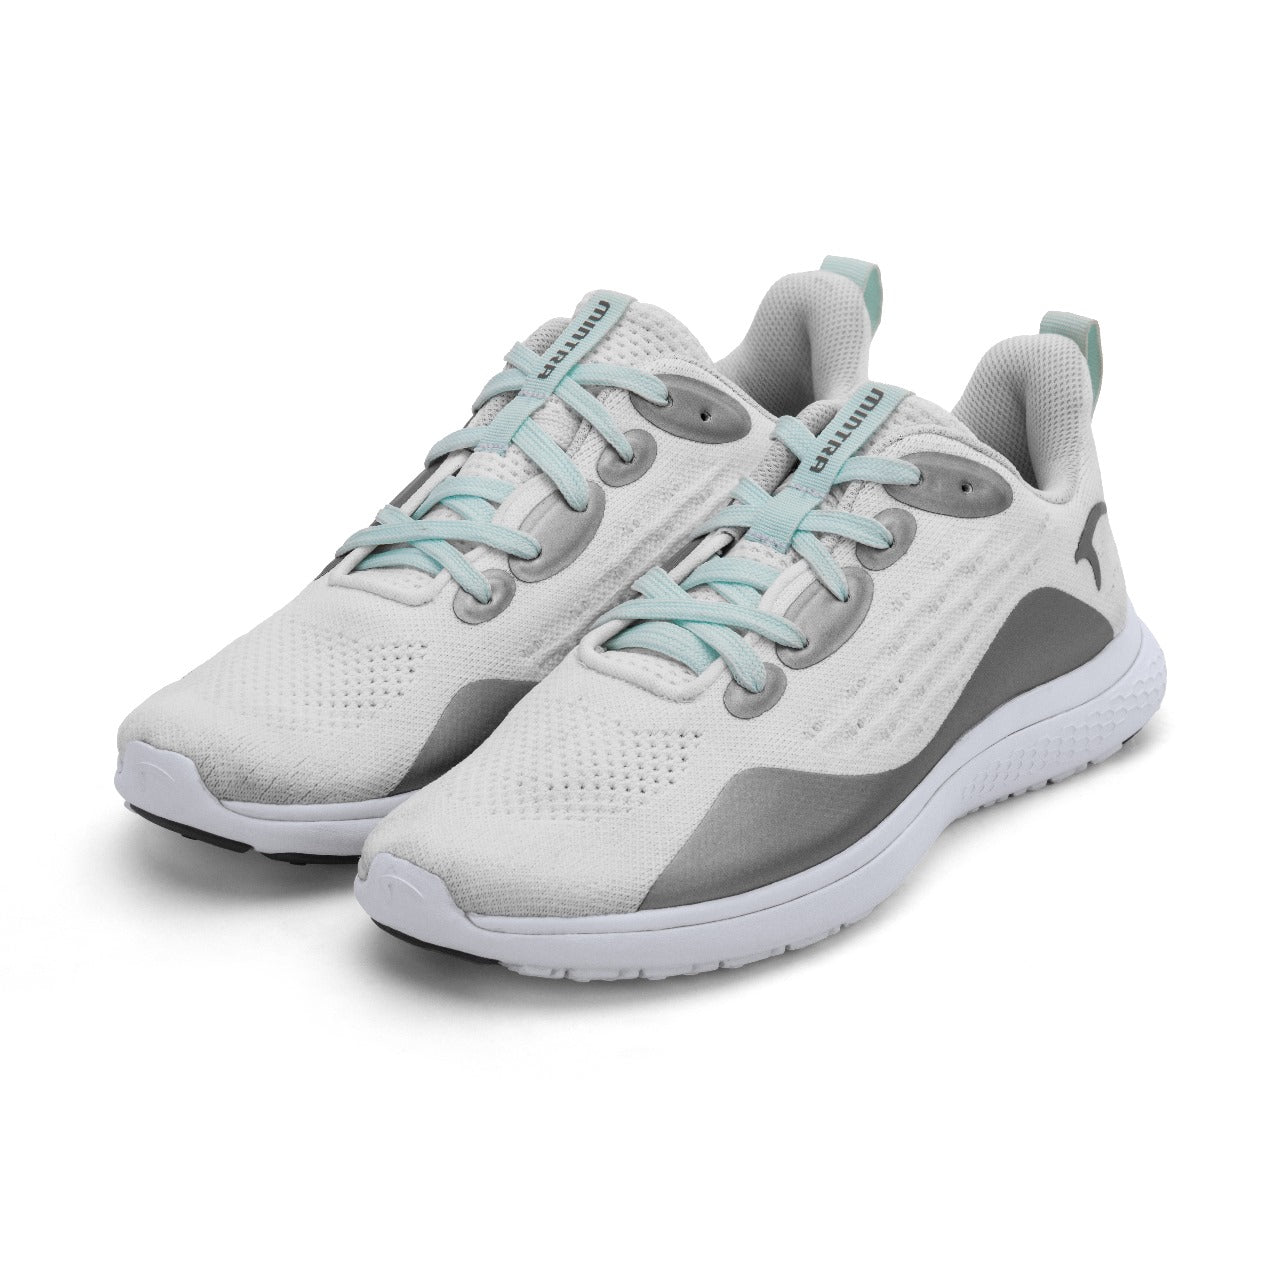 Mintra Stride Running Shoes For Women, Silver & Blue